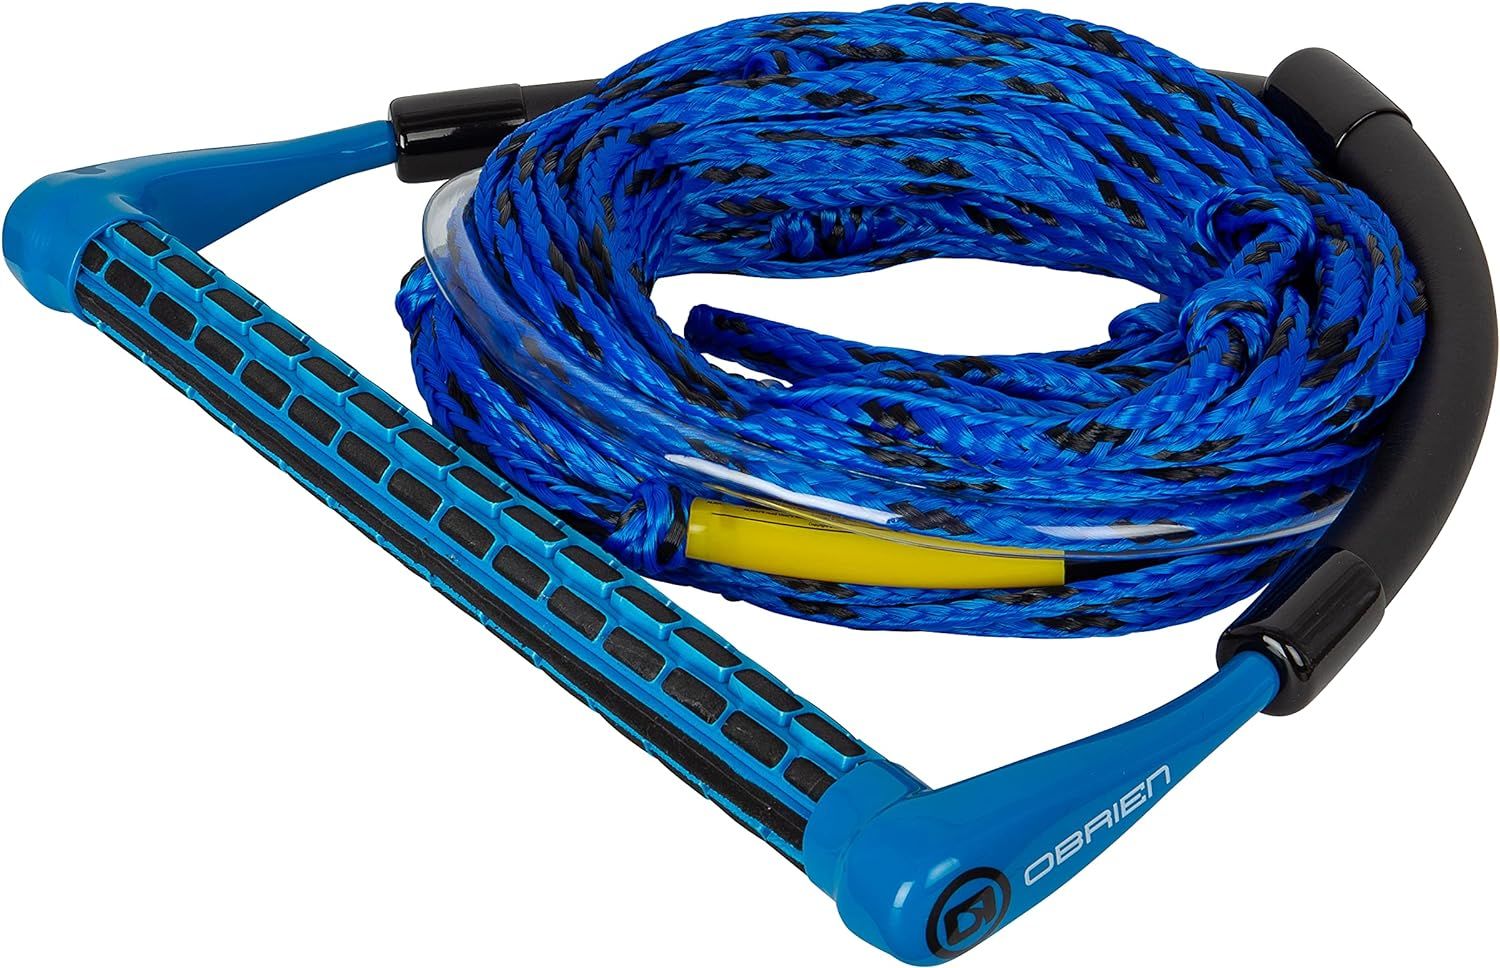 OBRIEN İP 4 SECTION POLY-E WAKEBOARD ROPE